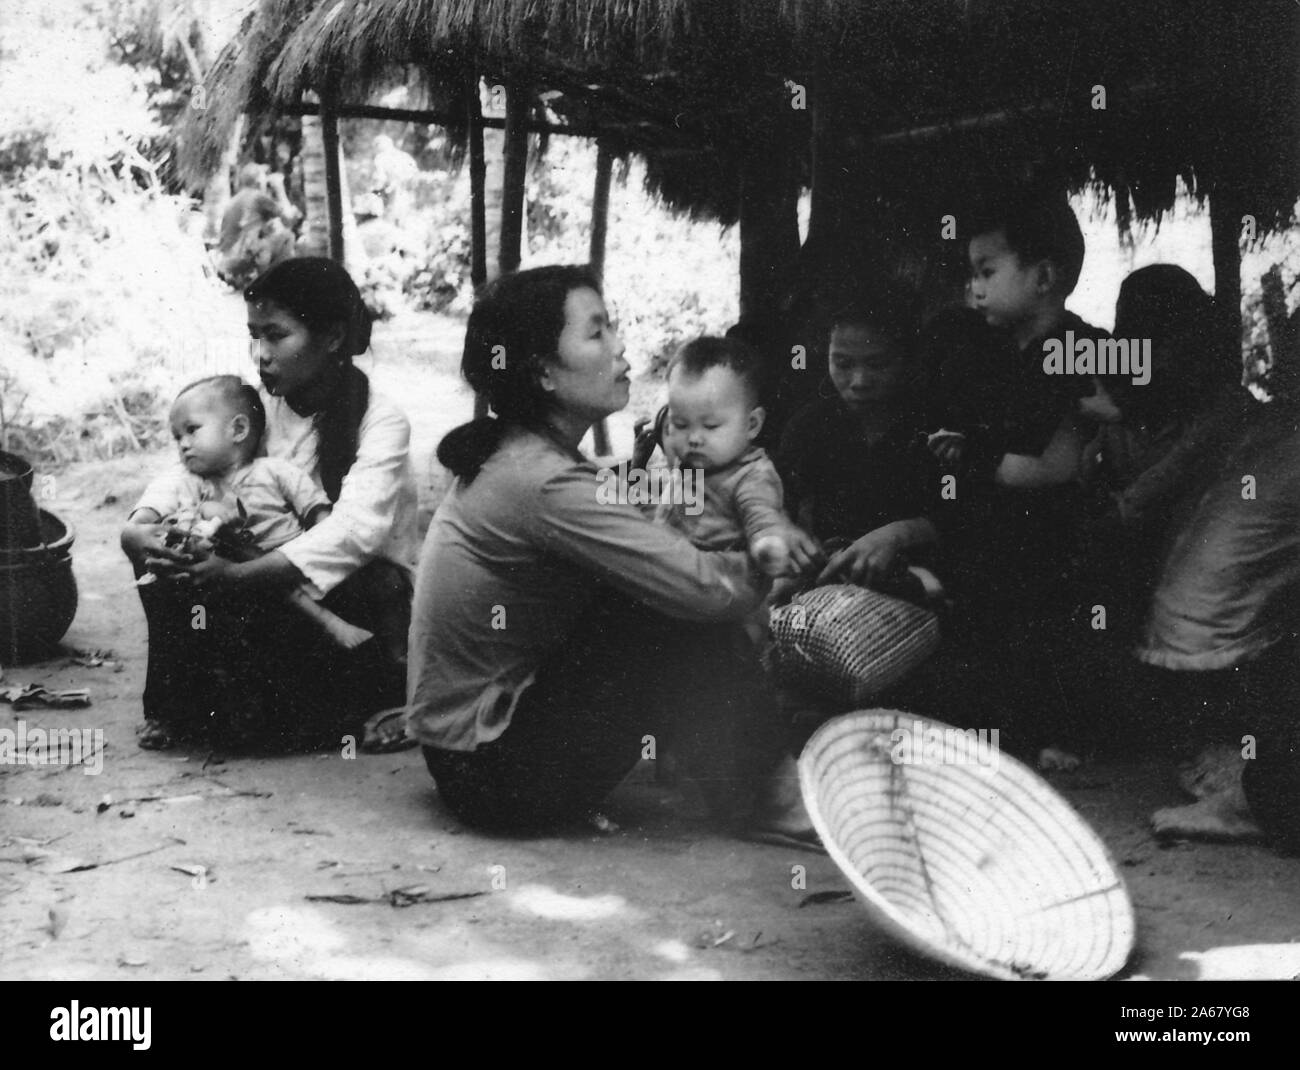 Civilian Vietnamese women and children sit together in the shade of thatched-roof hut on a sunny day, Vietnam, 1965. () Stock Photo